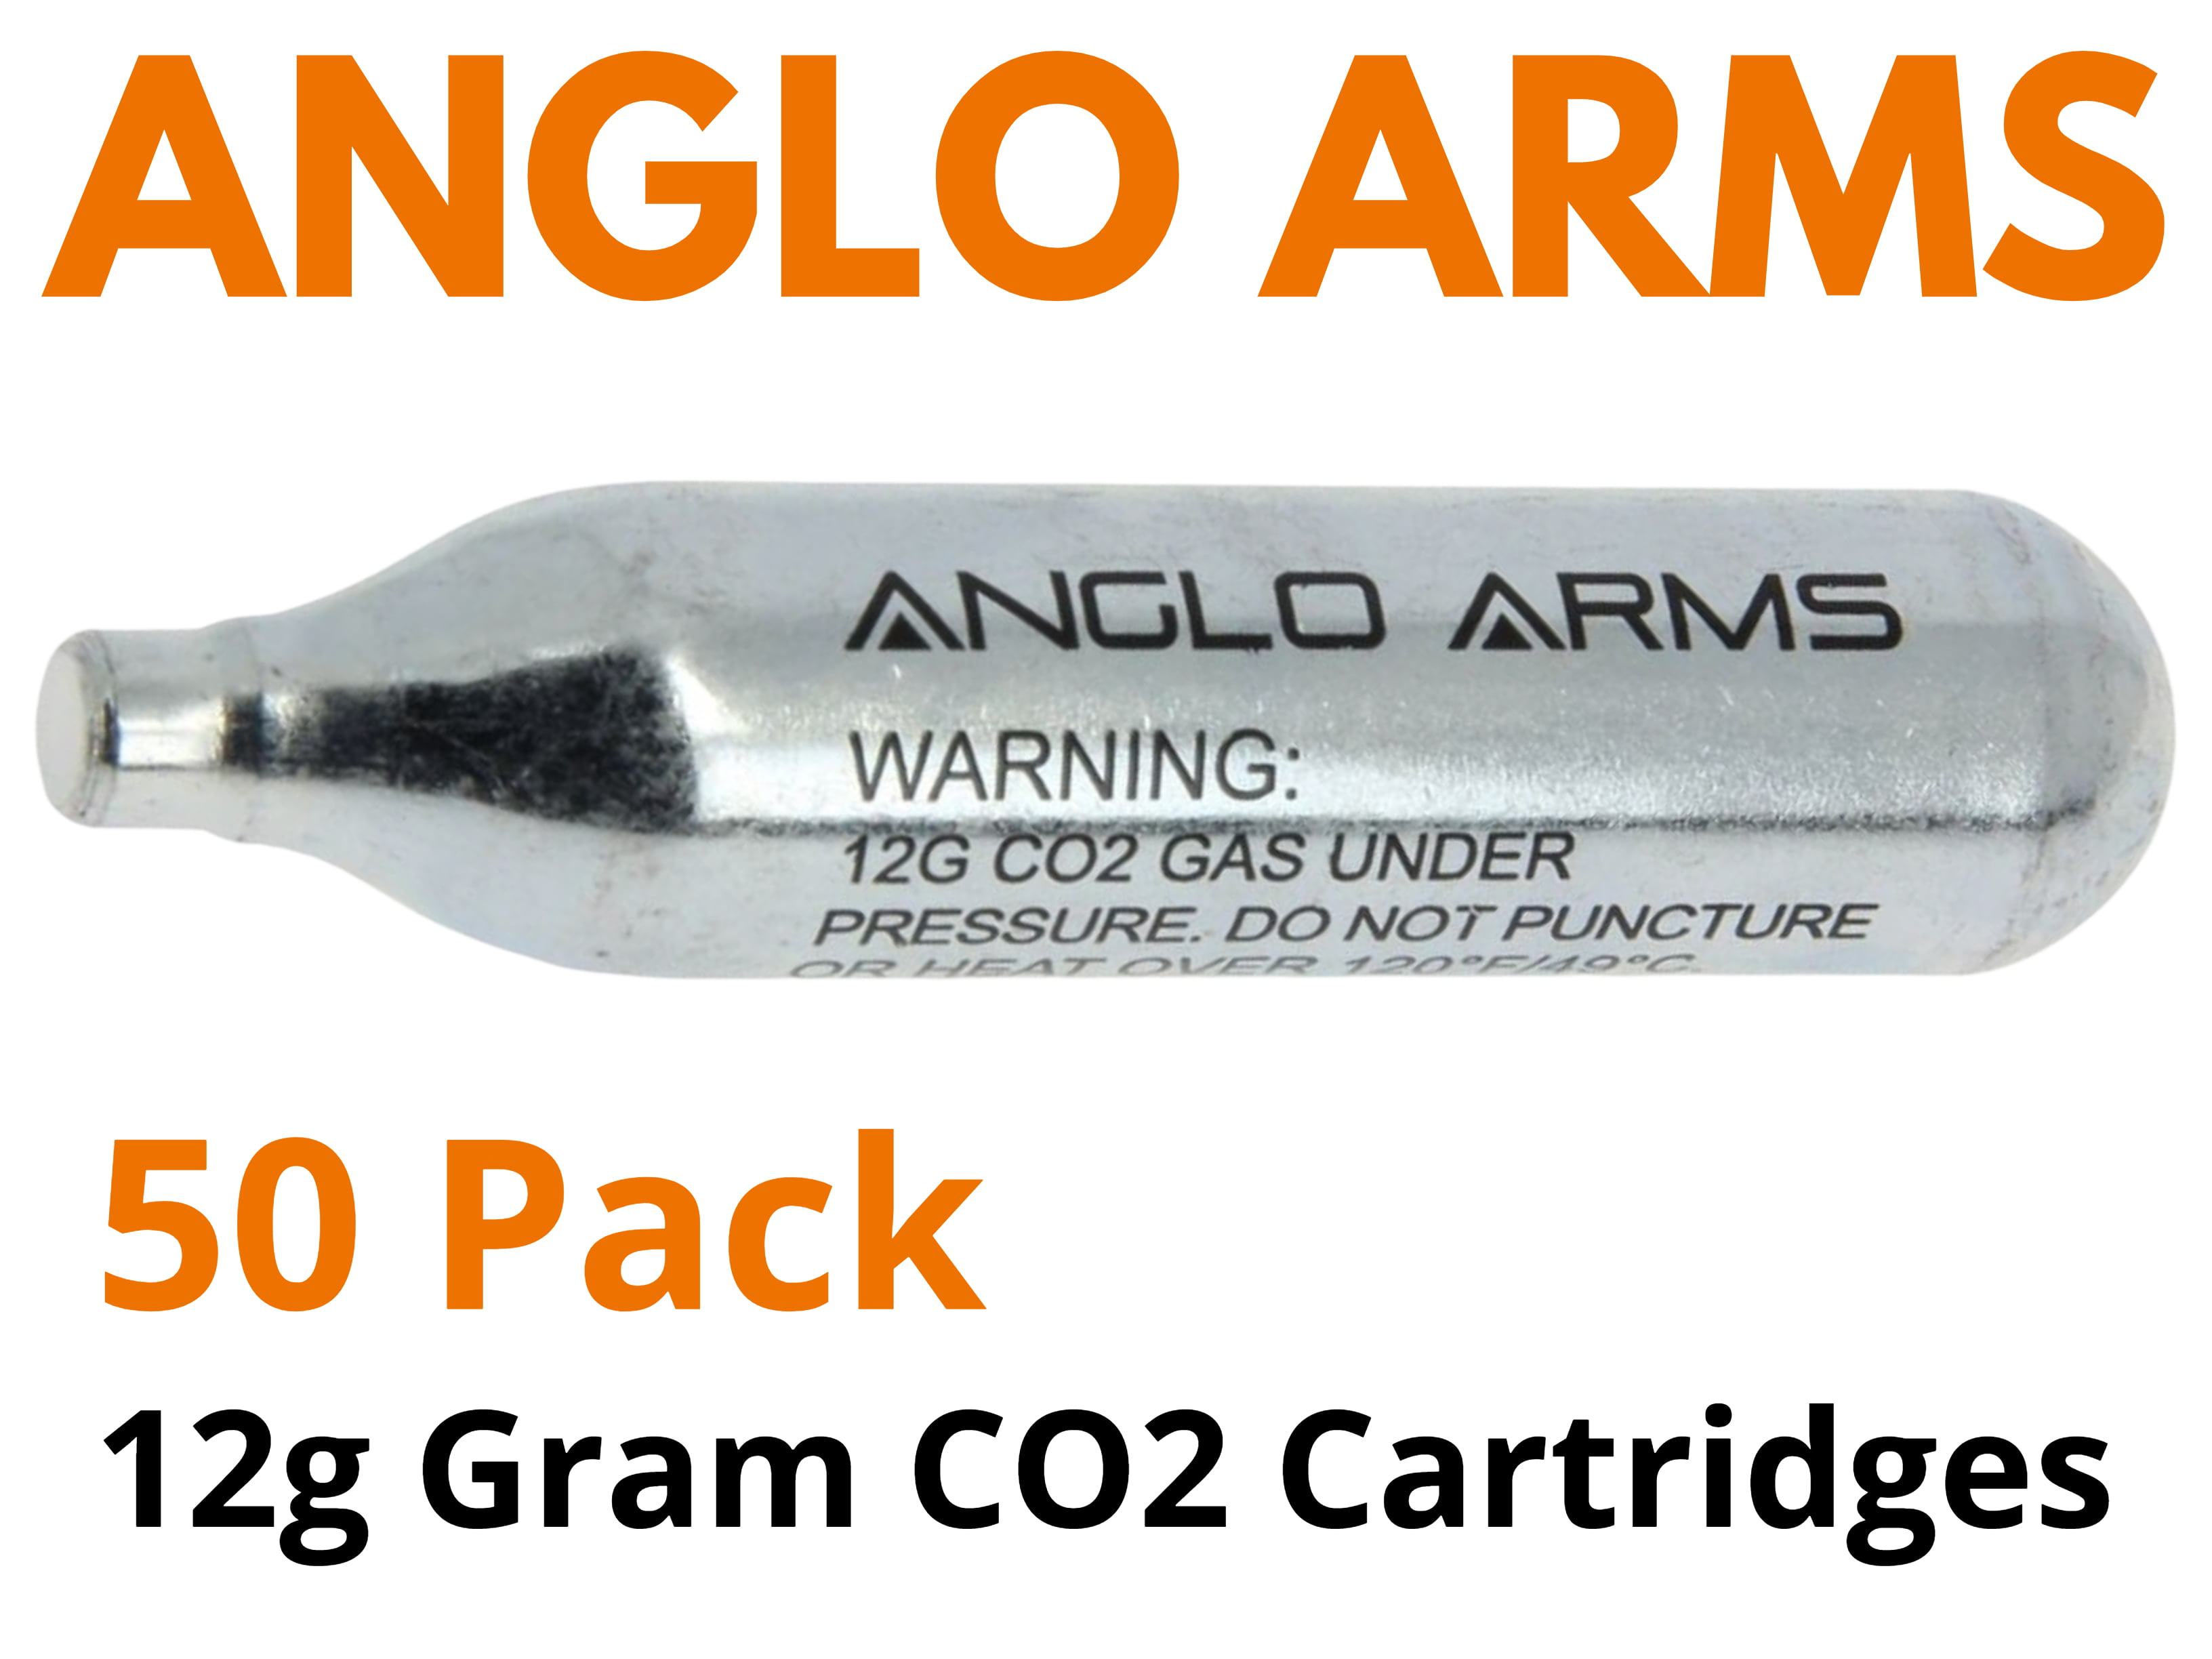 15 x Gaz CO2 Capsules Cartouche Cylindre Air Rifle Pistolet Anglo Arms 12 g 